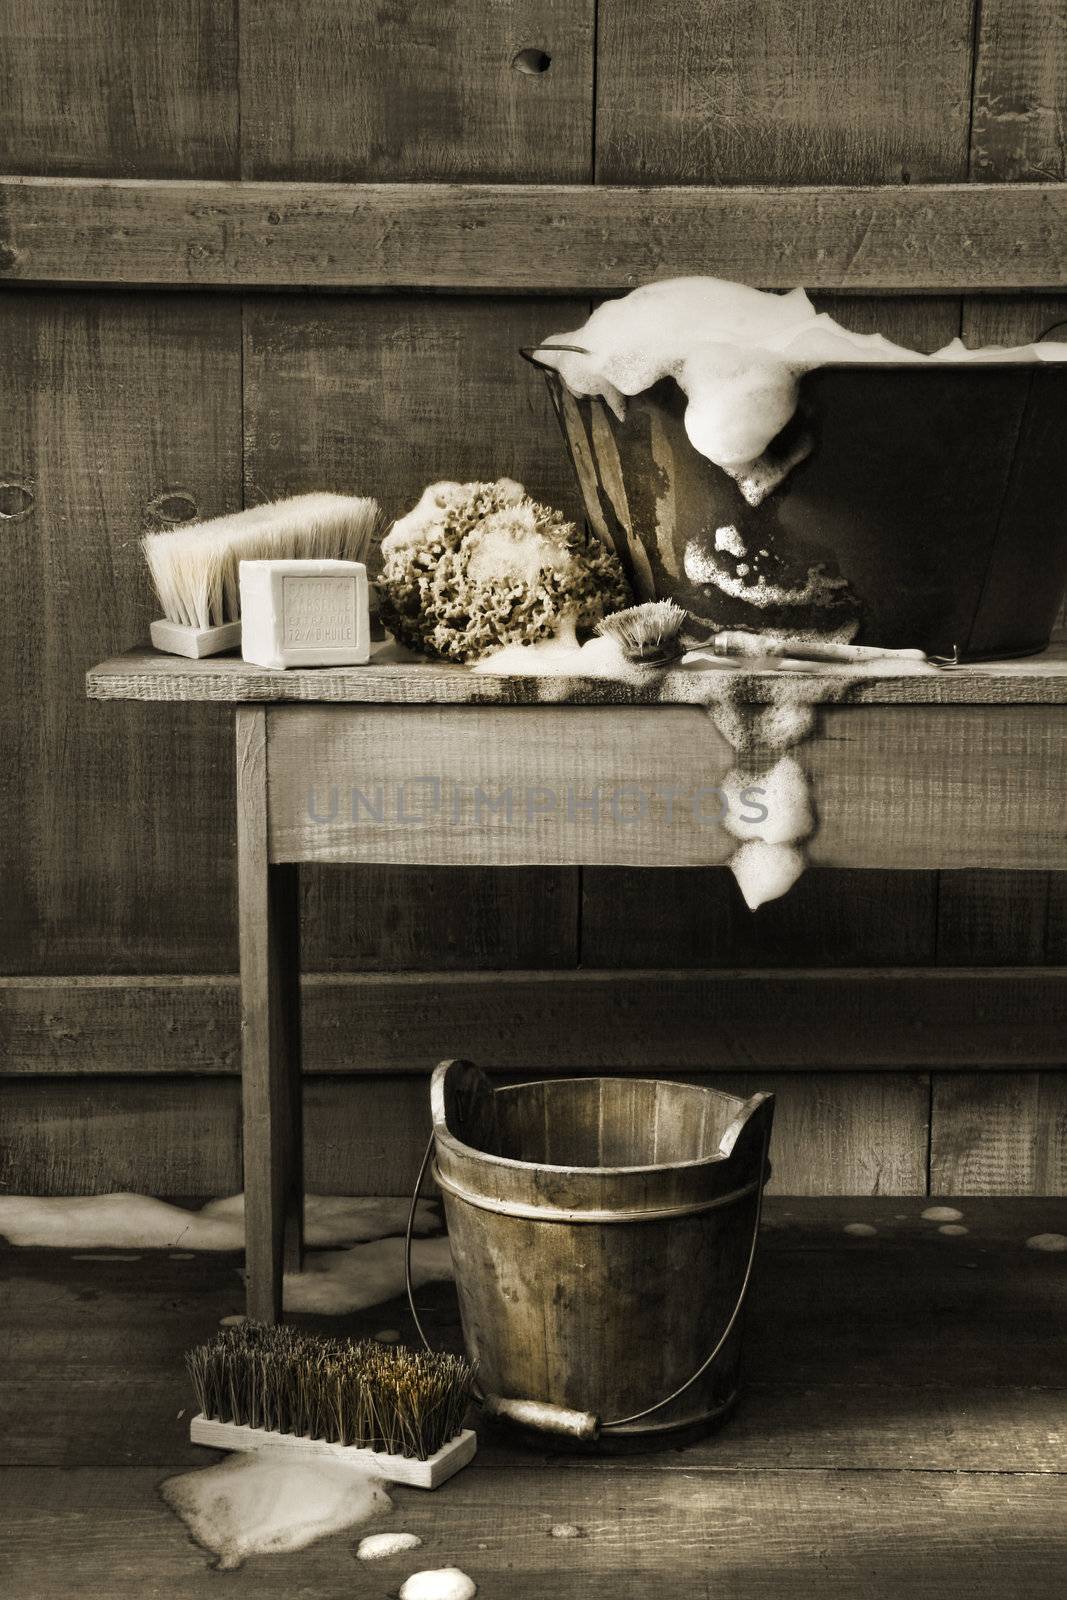 Old wash tub with soap and scrub brushes by Sandralise